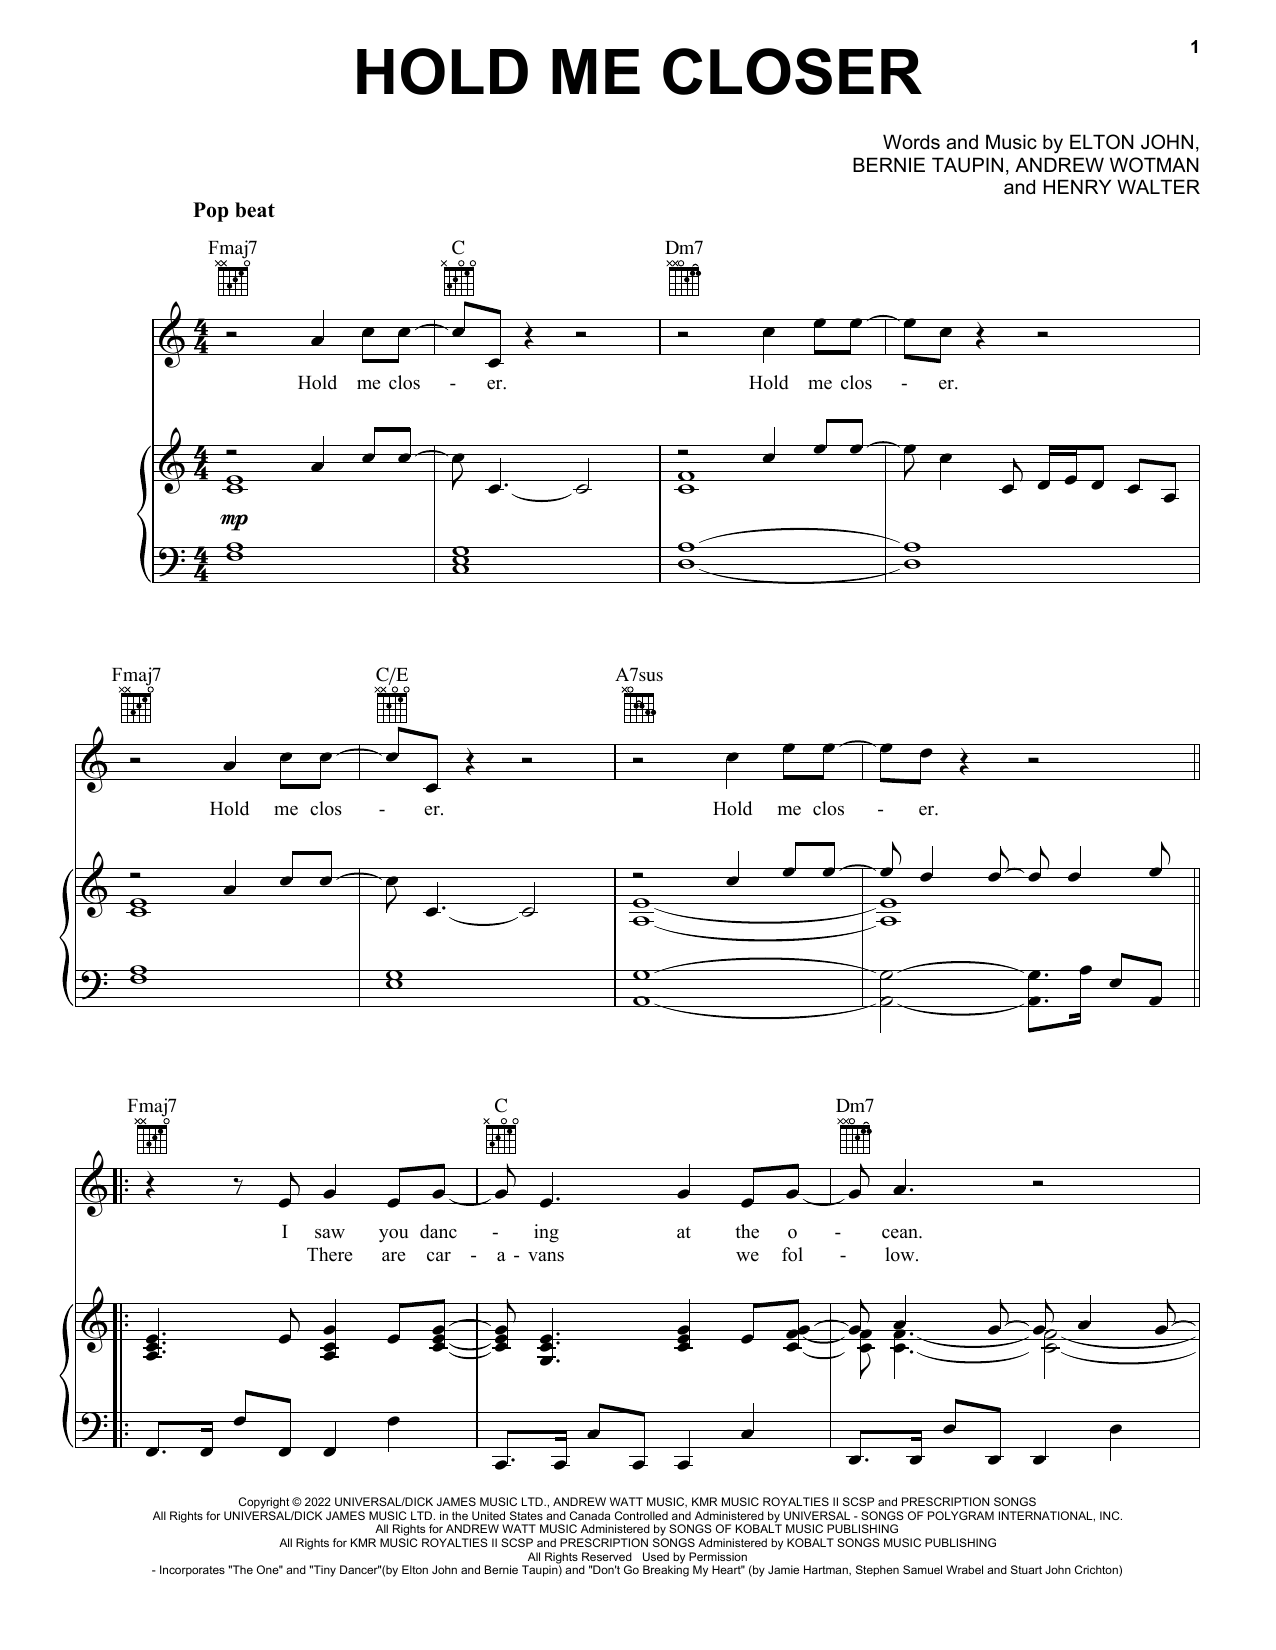 Elton John & Britney Spears Hold Me Closer sheet music notes and chords. Download Printable PDF.